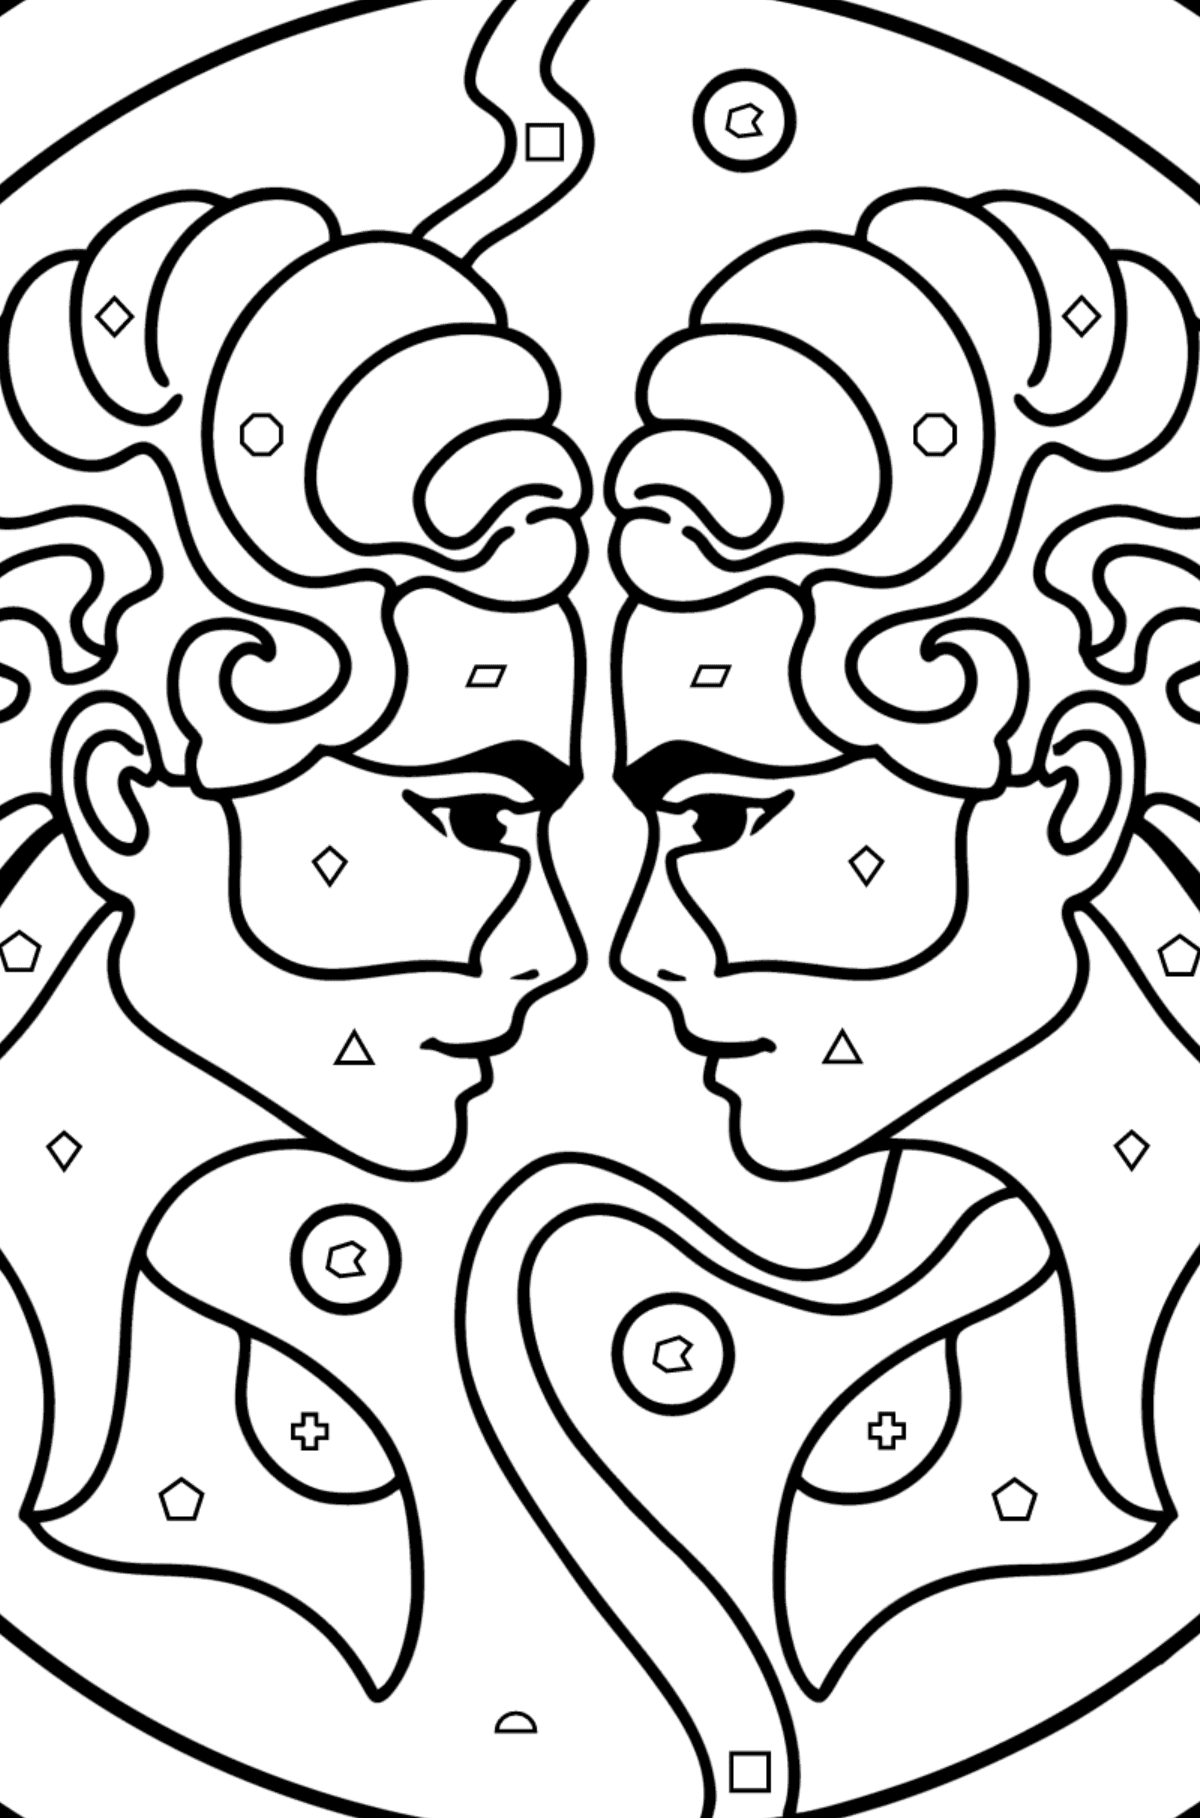 Coloring page for kids - Gemini zodiac sign - Coloring by Geometric Shapes for Kids